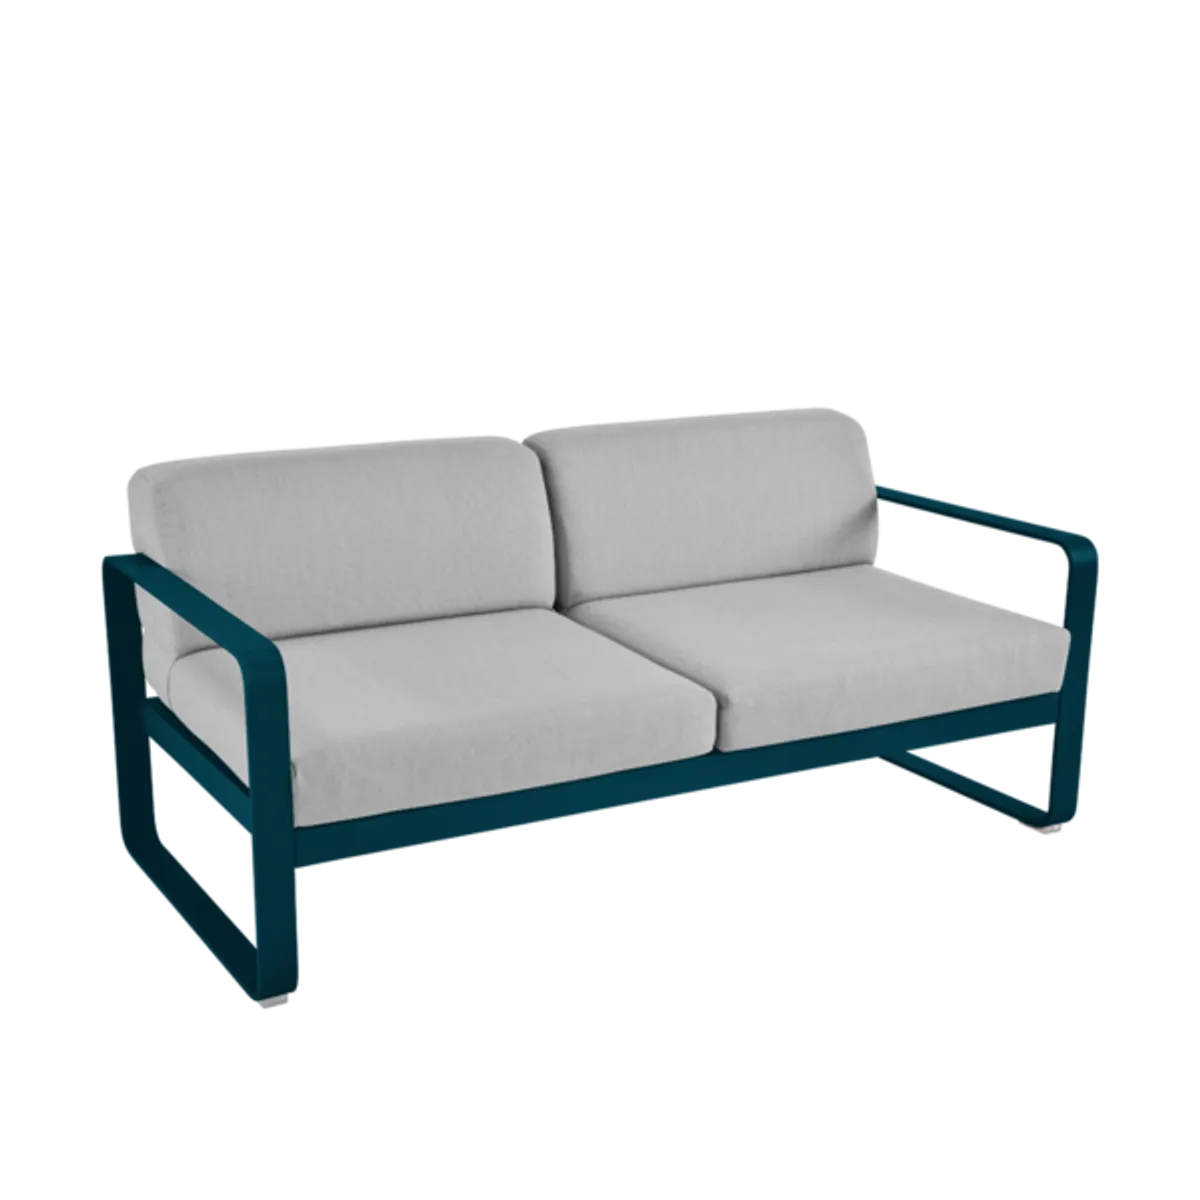 Bellevie Sofa Inside Out Contracts